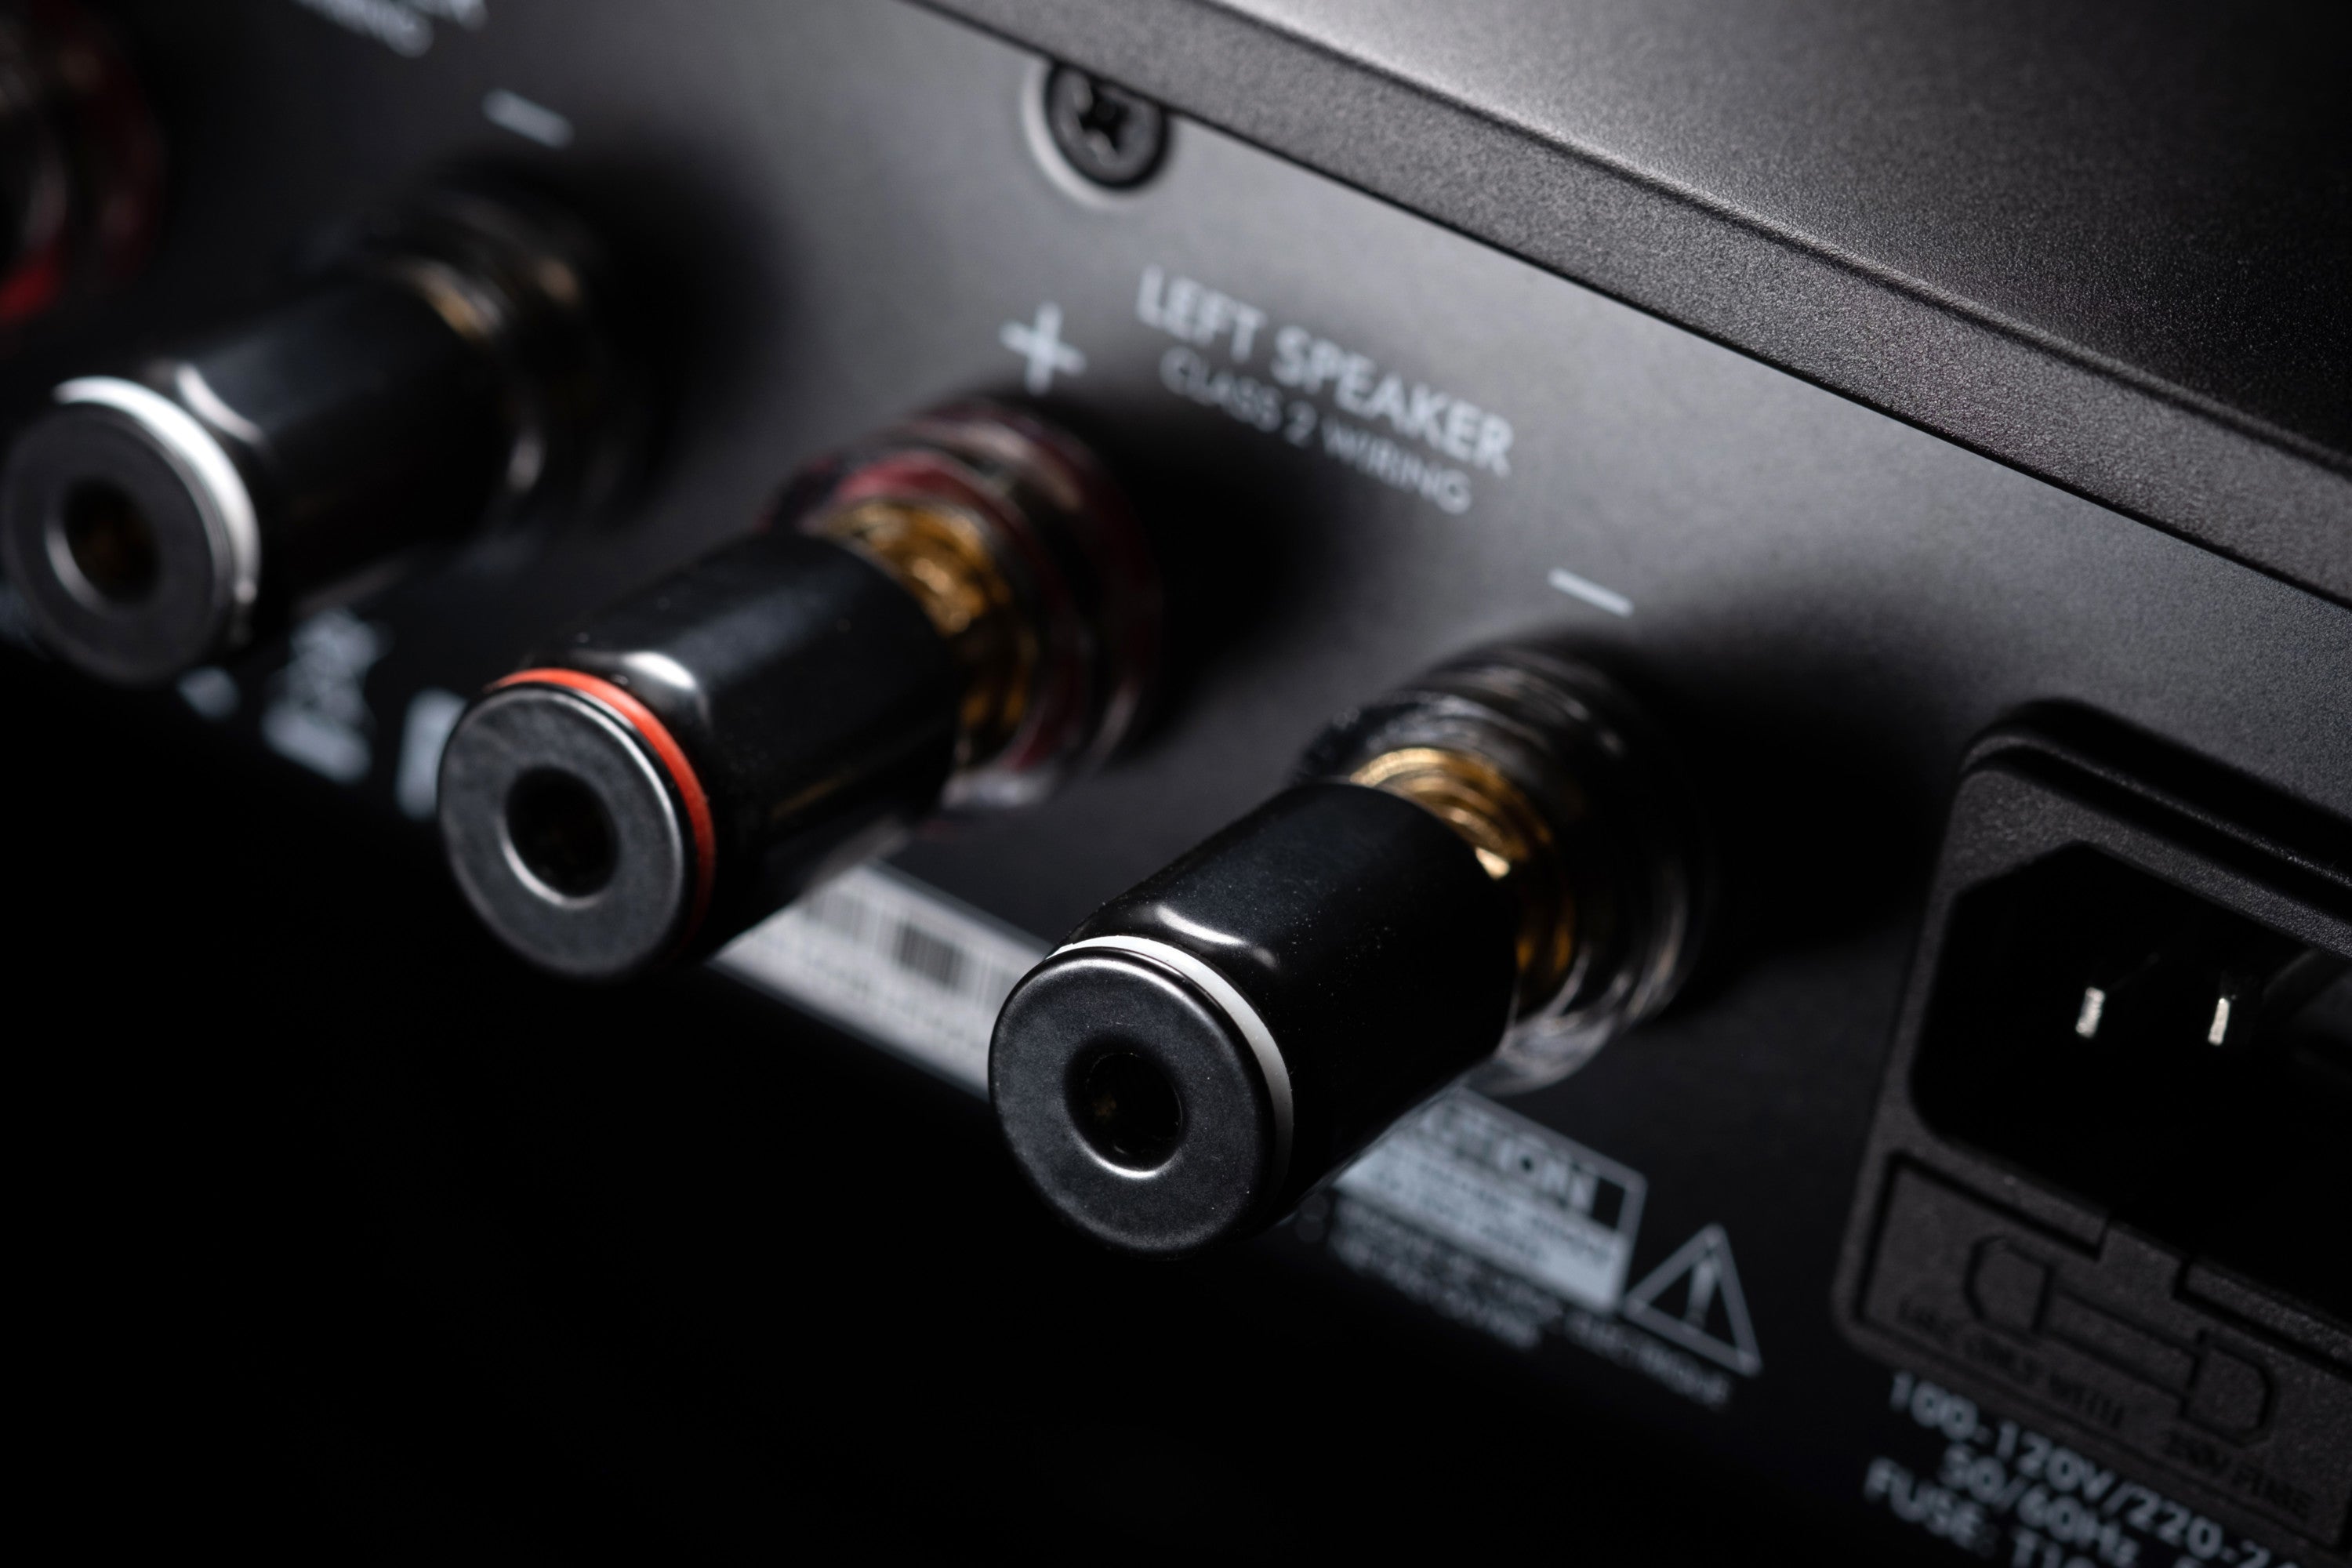 I150 Integrated Amplifier